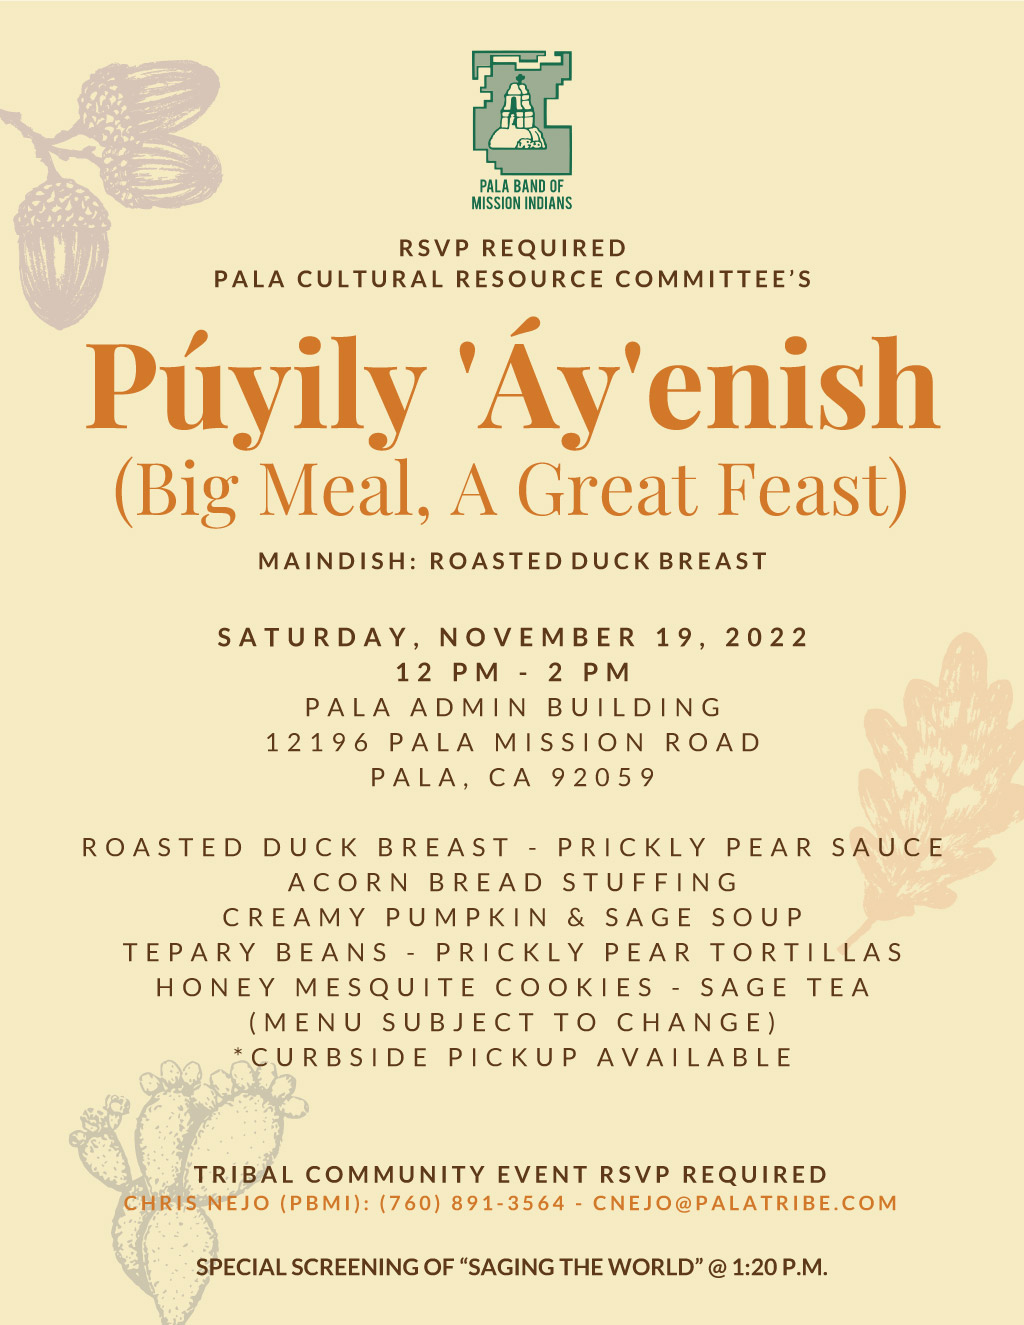 Pala Band of Mission Indians Indian Health Council California Púyily 'Áy'enish Big Meal A Great Feast 2022